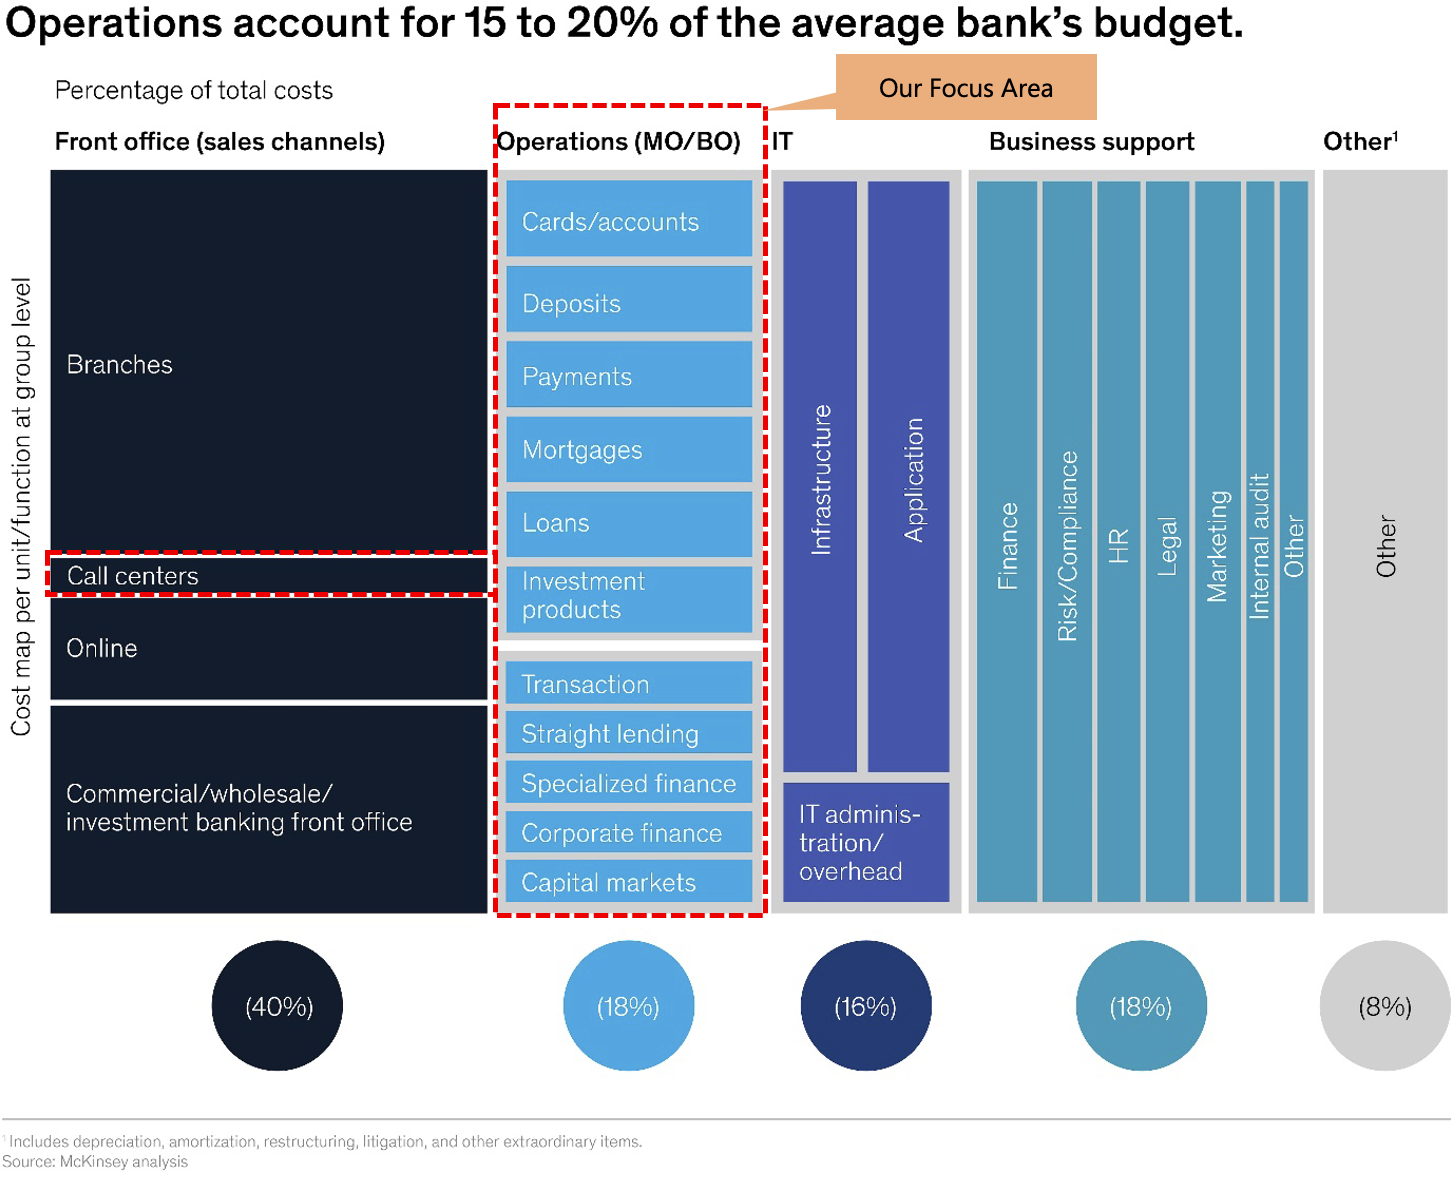 UiPath automation focus area for banking graphic